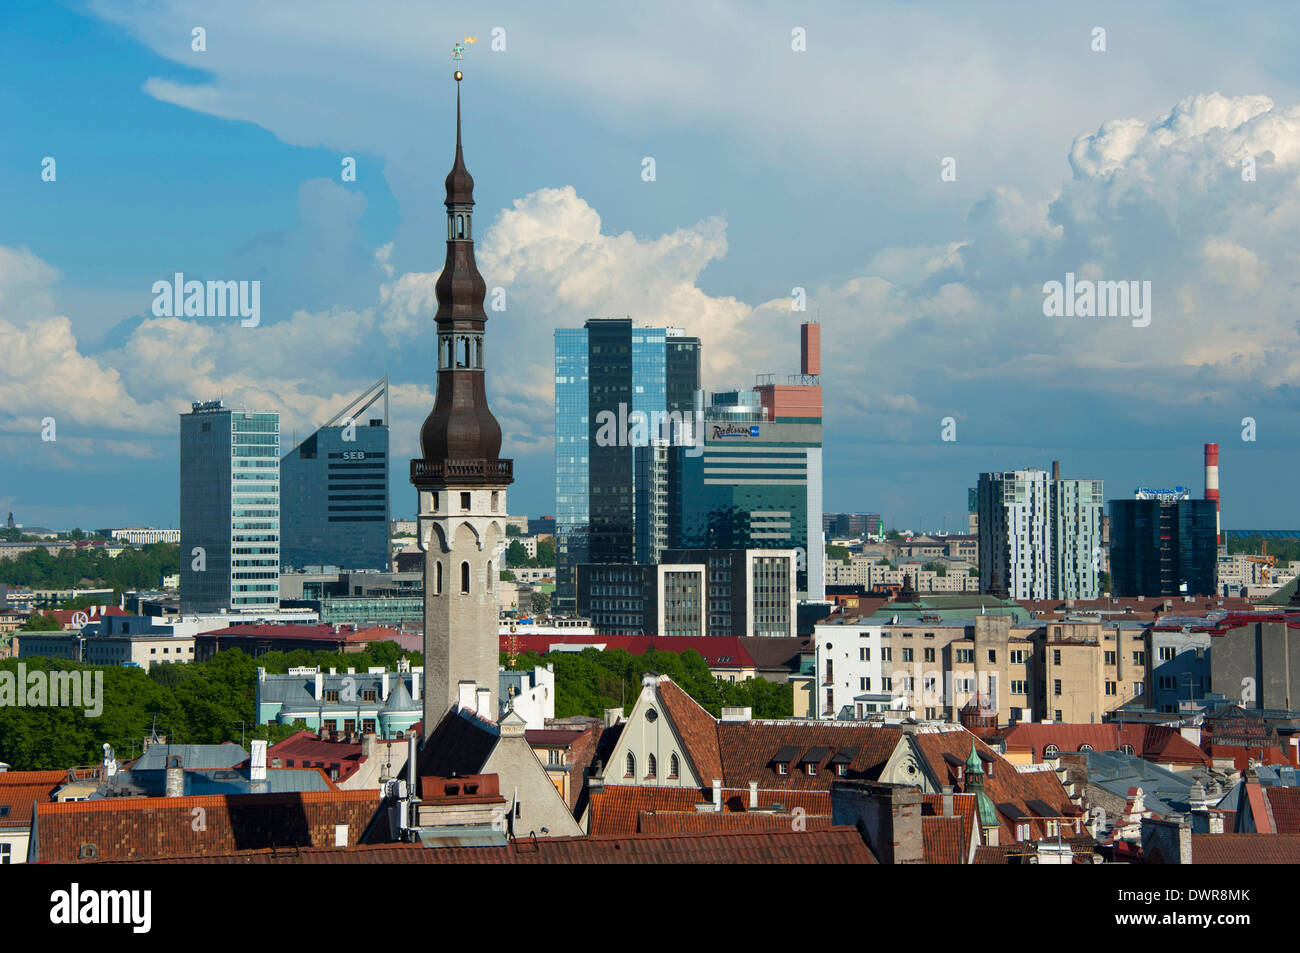 Old and new town, Tallinn Stock Photo